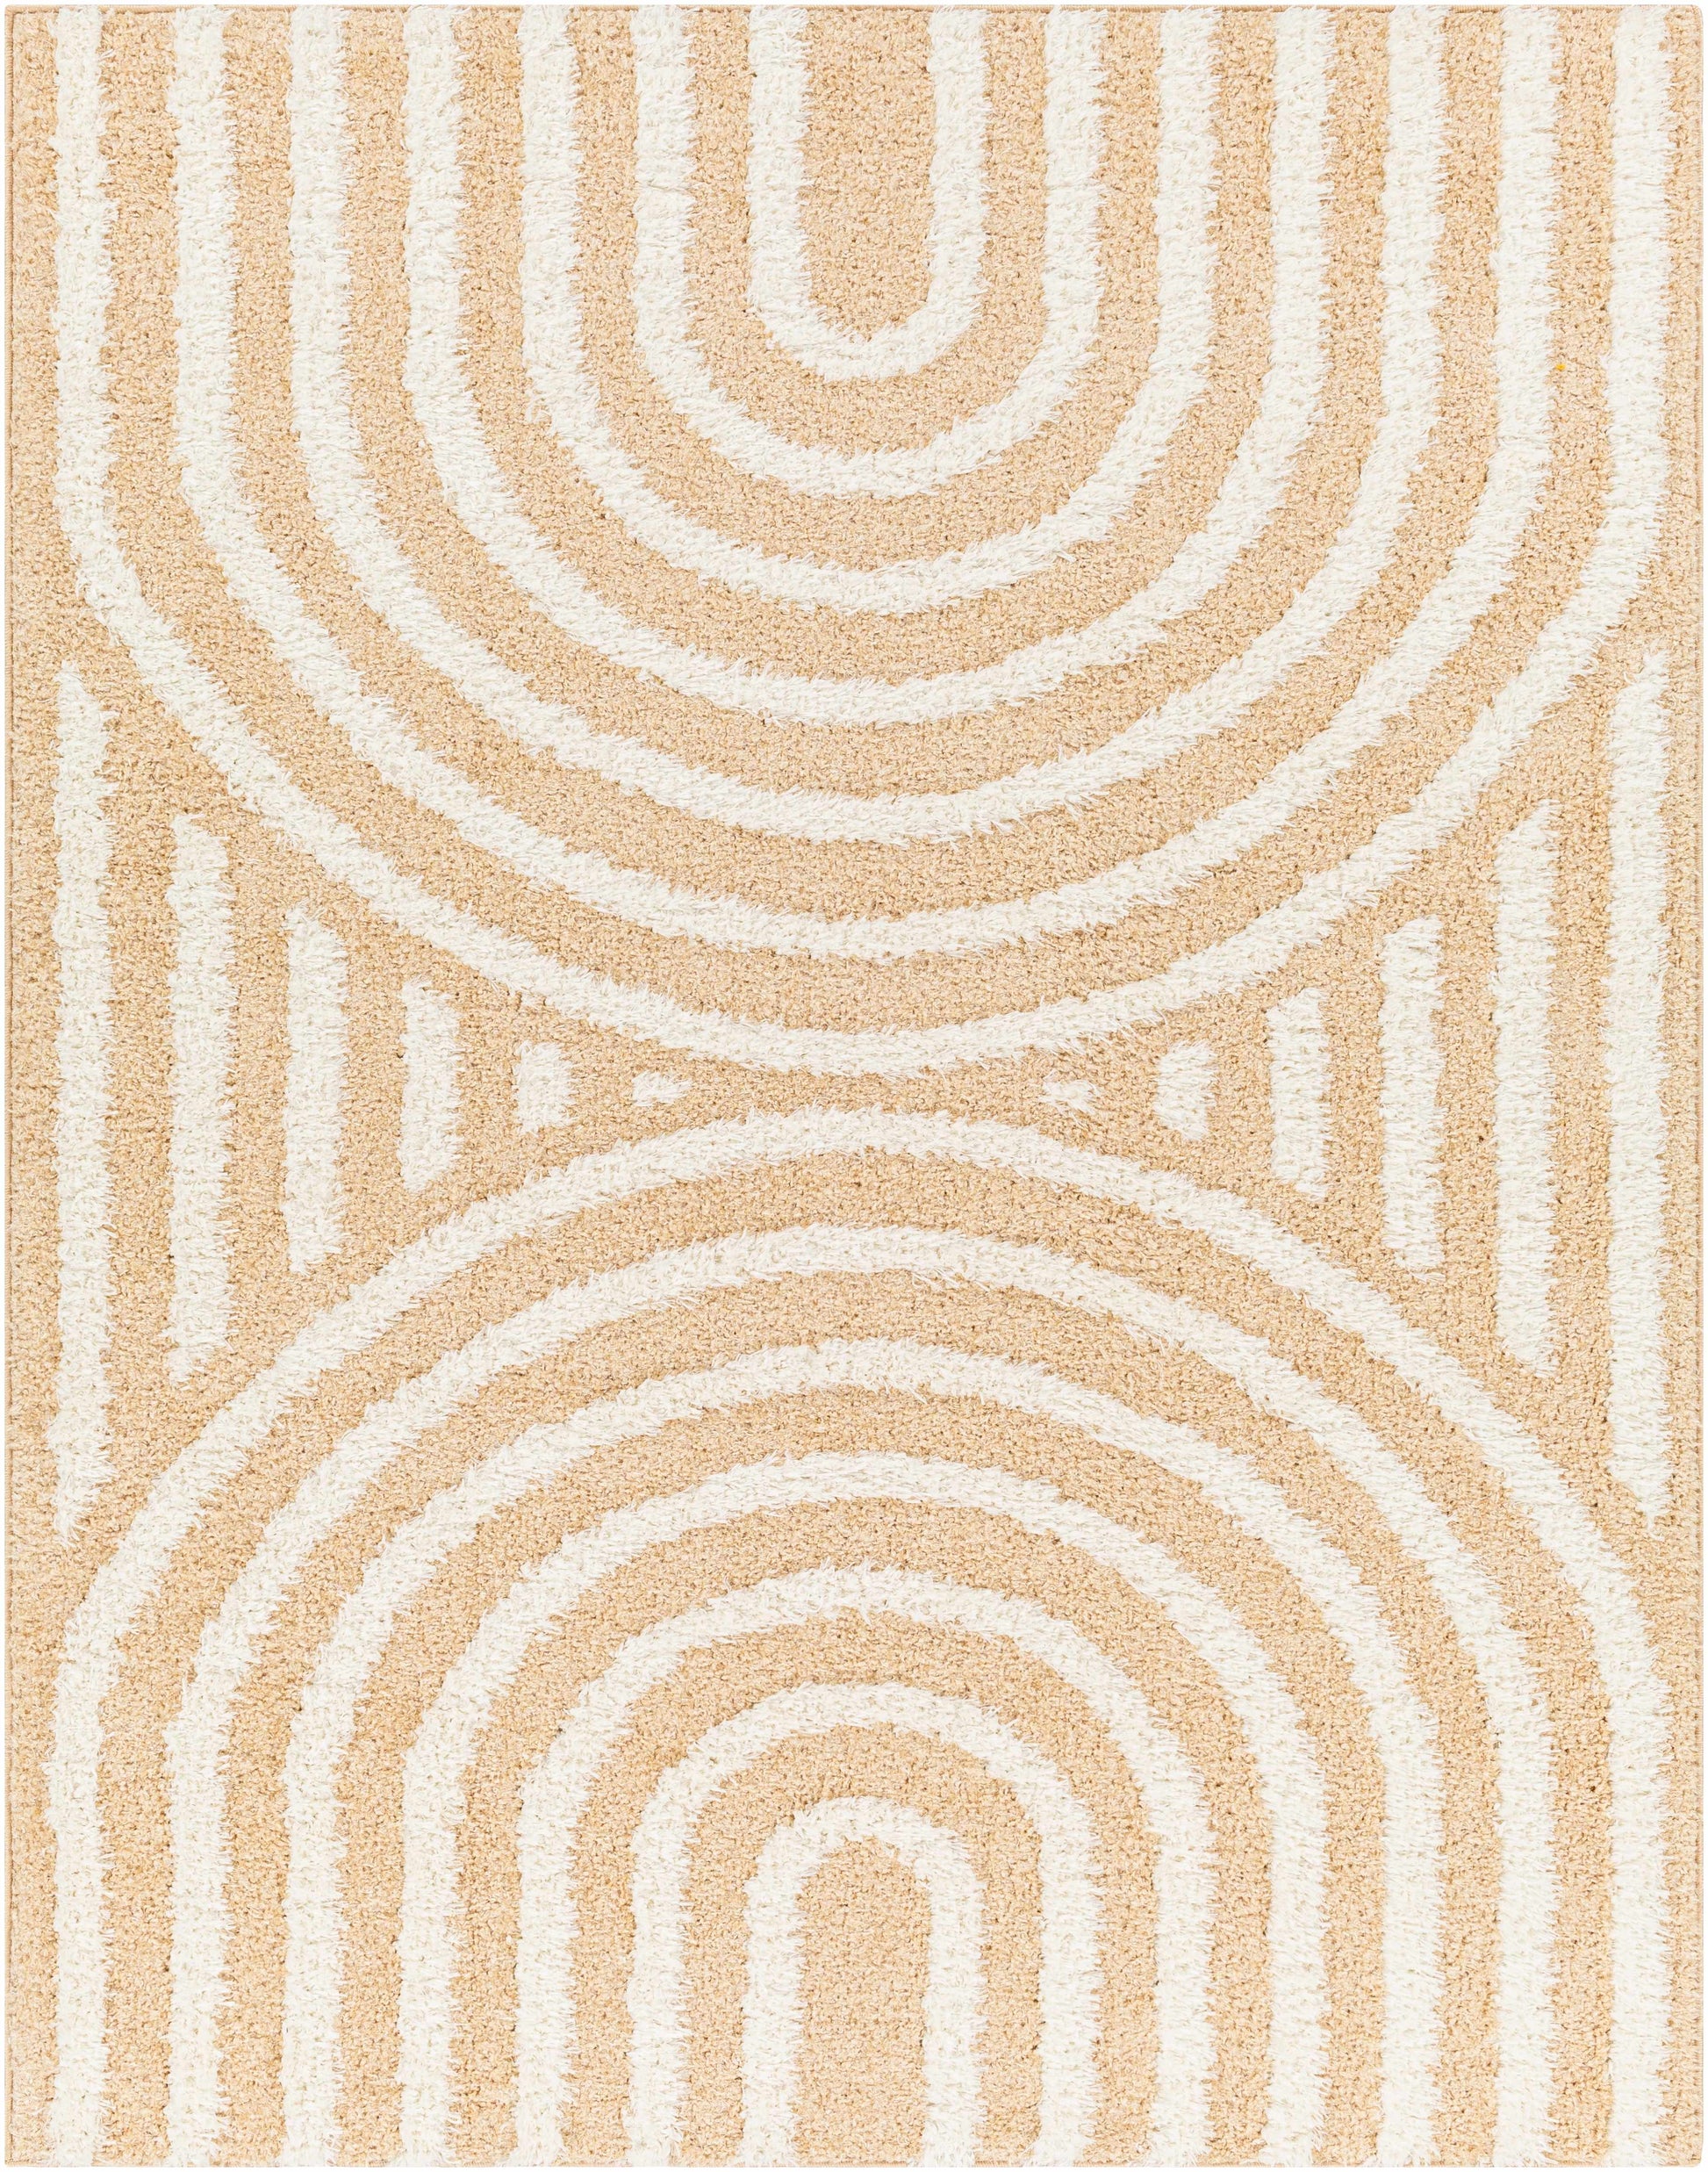 Boutique Rugs Rugs 5'3" x 7' Rectangle Arnel Beige Area Rug